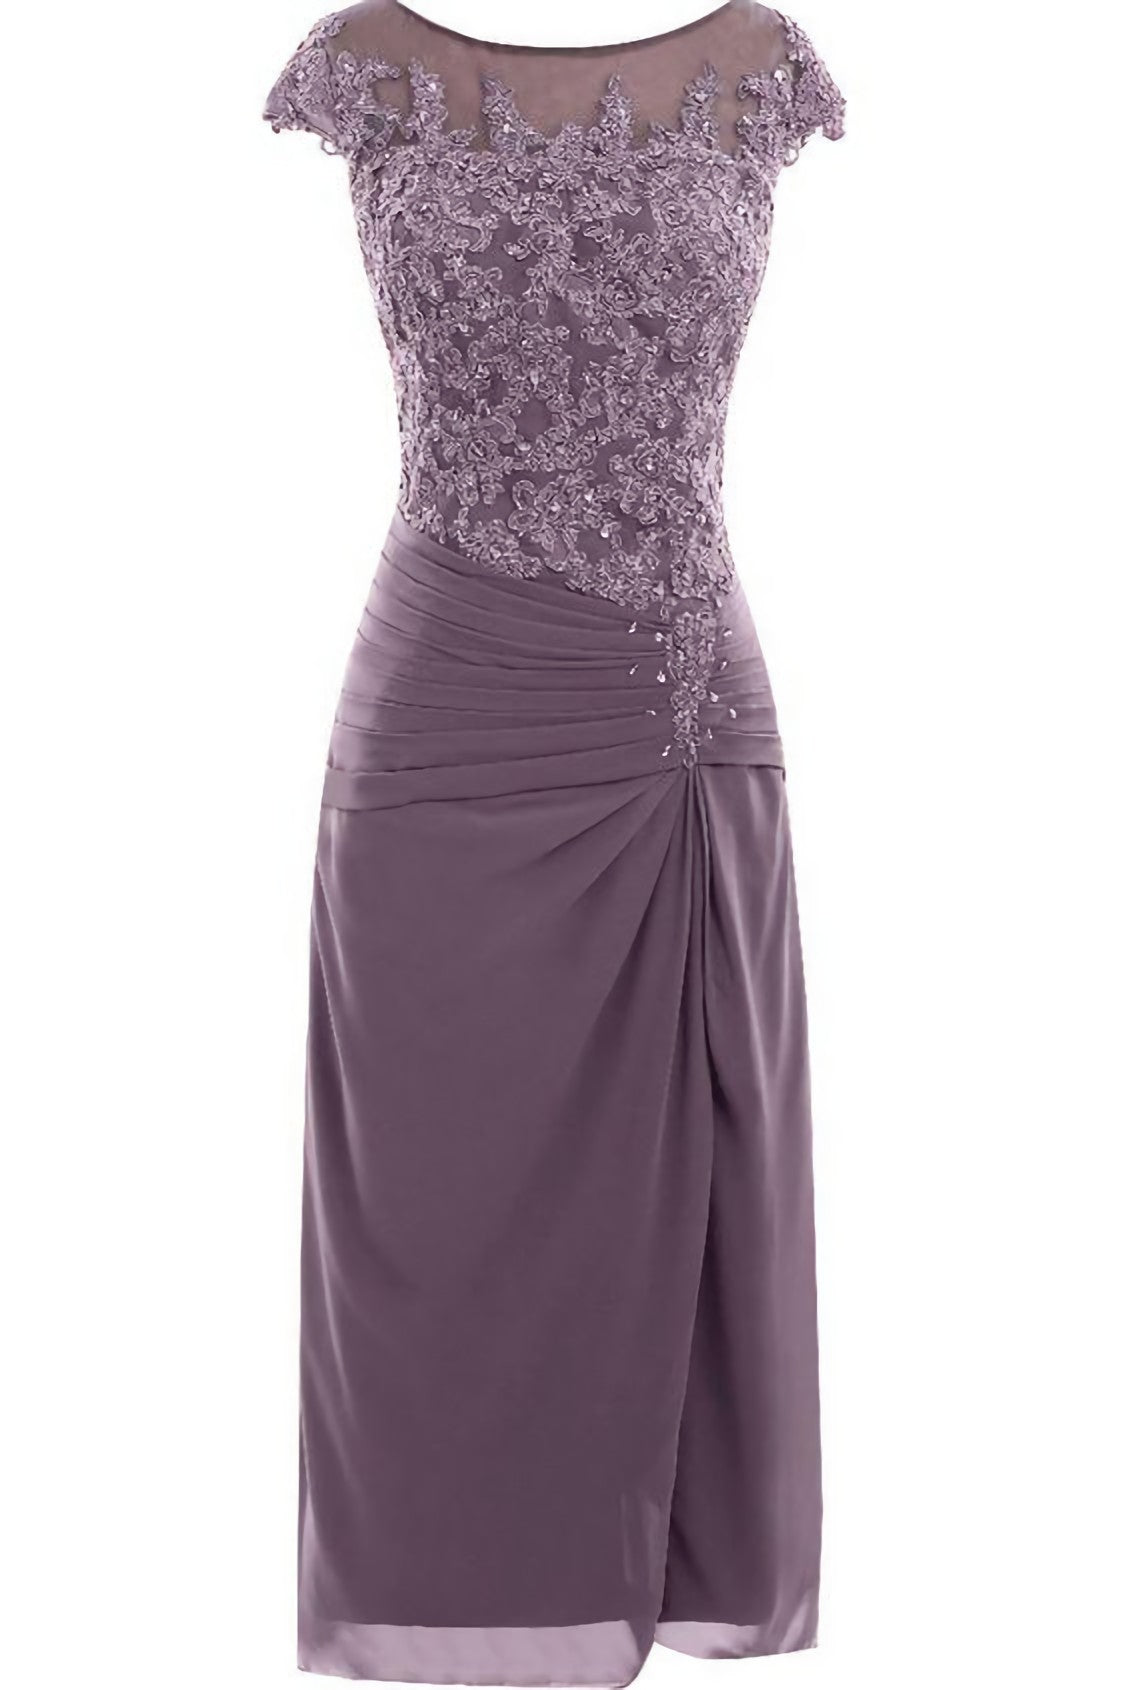 Party Dress Large Size, Knee Length Mauve Tight Chiffon Mother Of The Bride Prom Dress, With Cap Sleeves